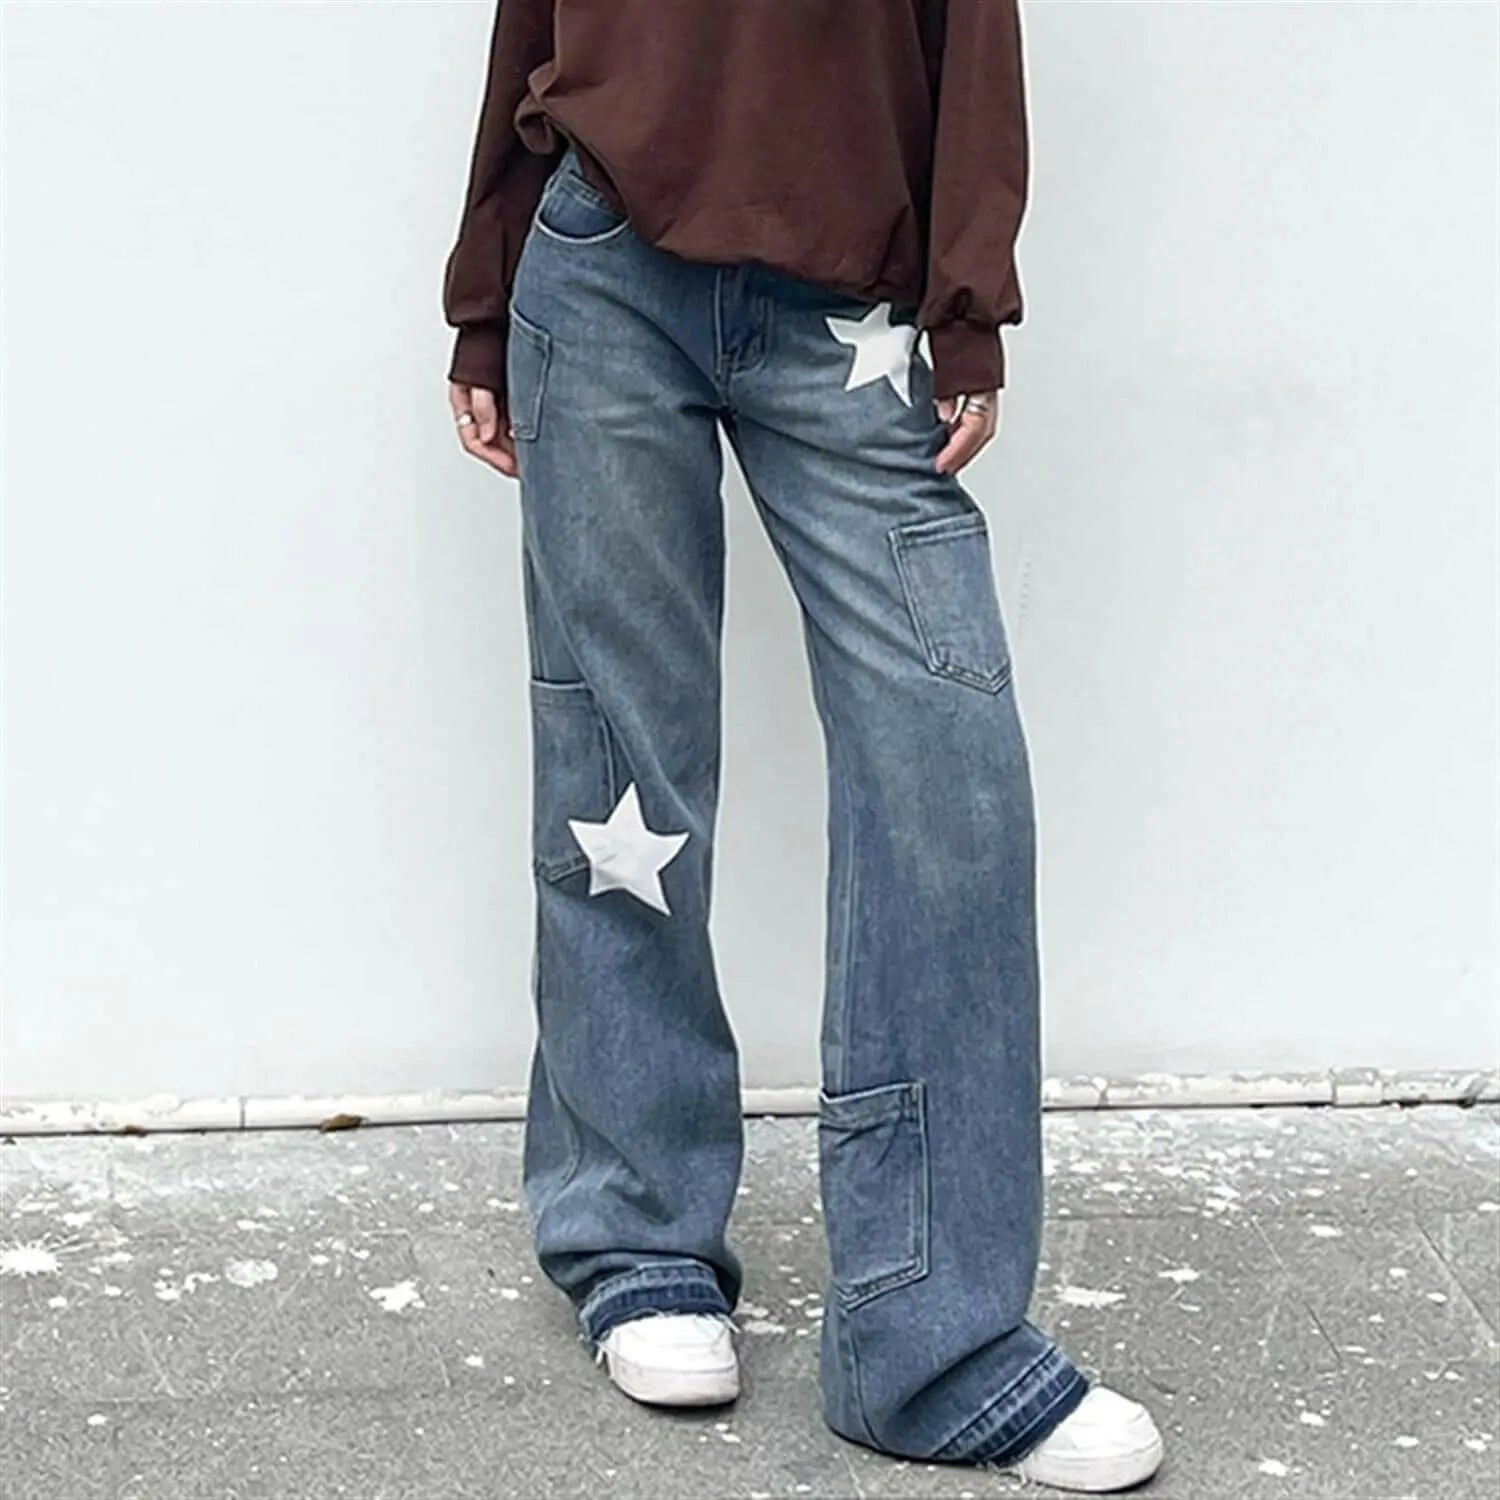 Ladies Flared Trousers Jeans Trousers Long Stretch Skinny Flared Jeans Flared Wide Jeans Trousers Leg Denim Trousers Low-rise Jeans Hipster Trousers